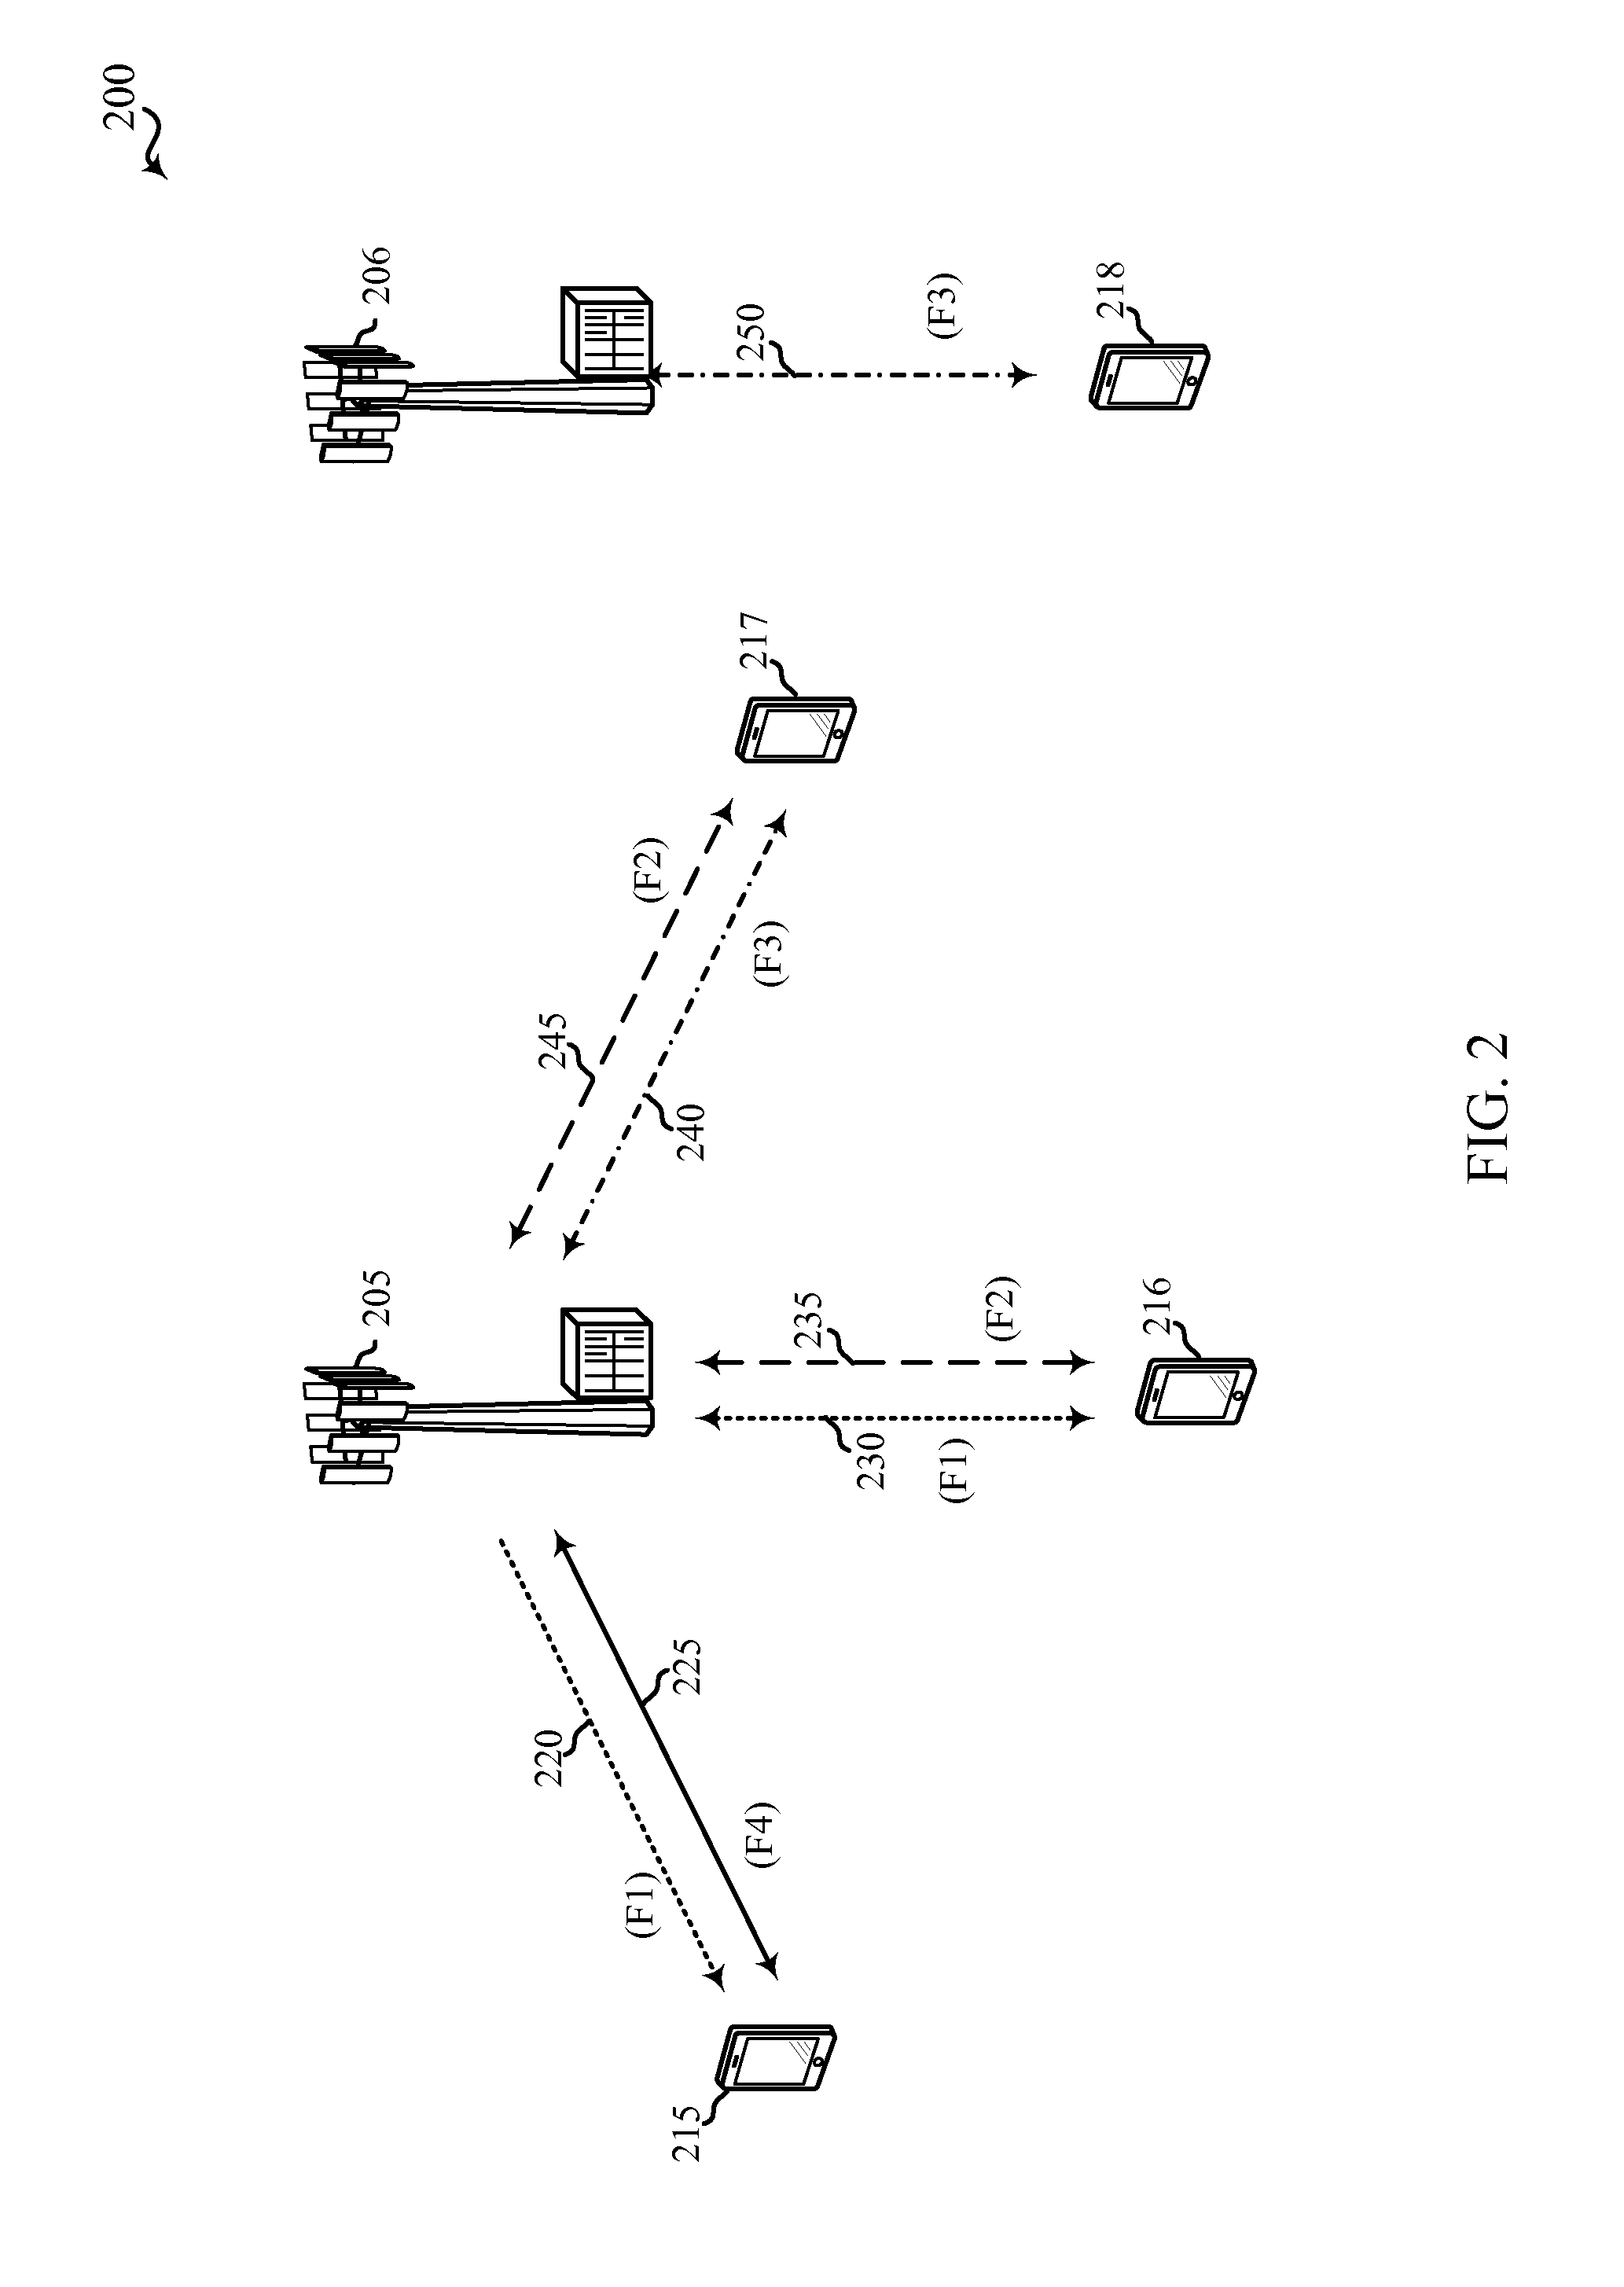 Techniques for transmitting synchronization signals in a shared radio frequency spectrum band